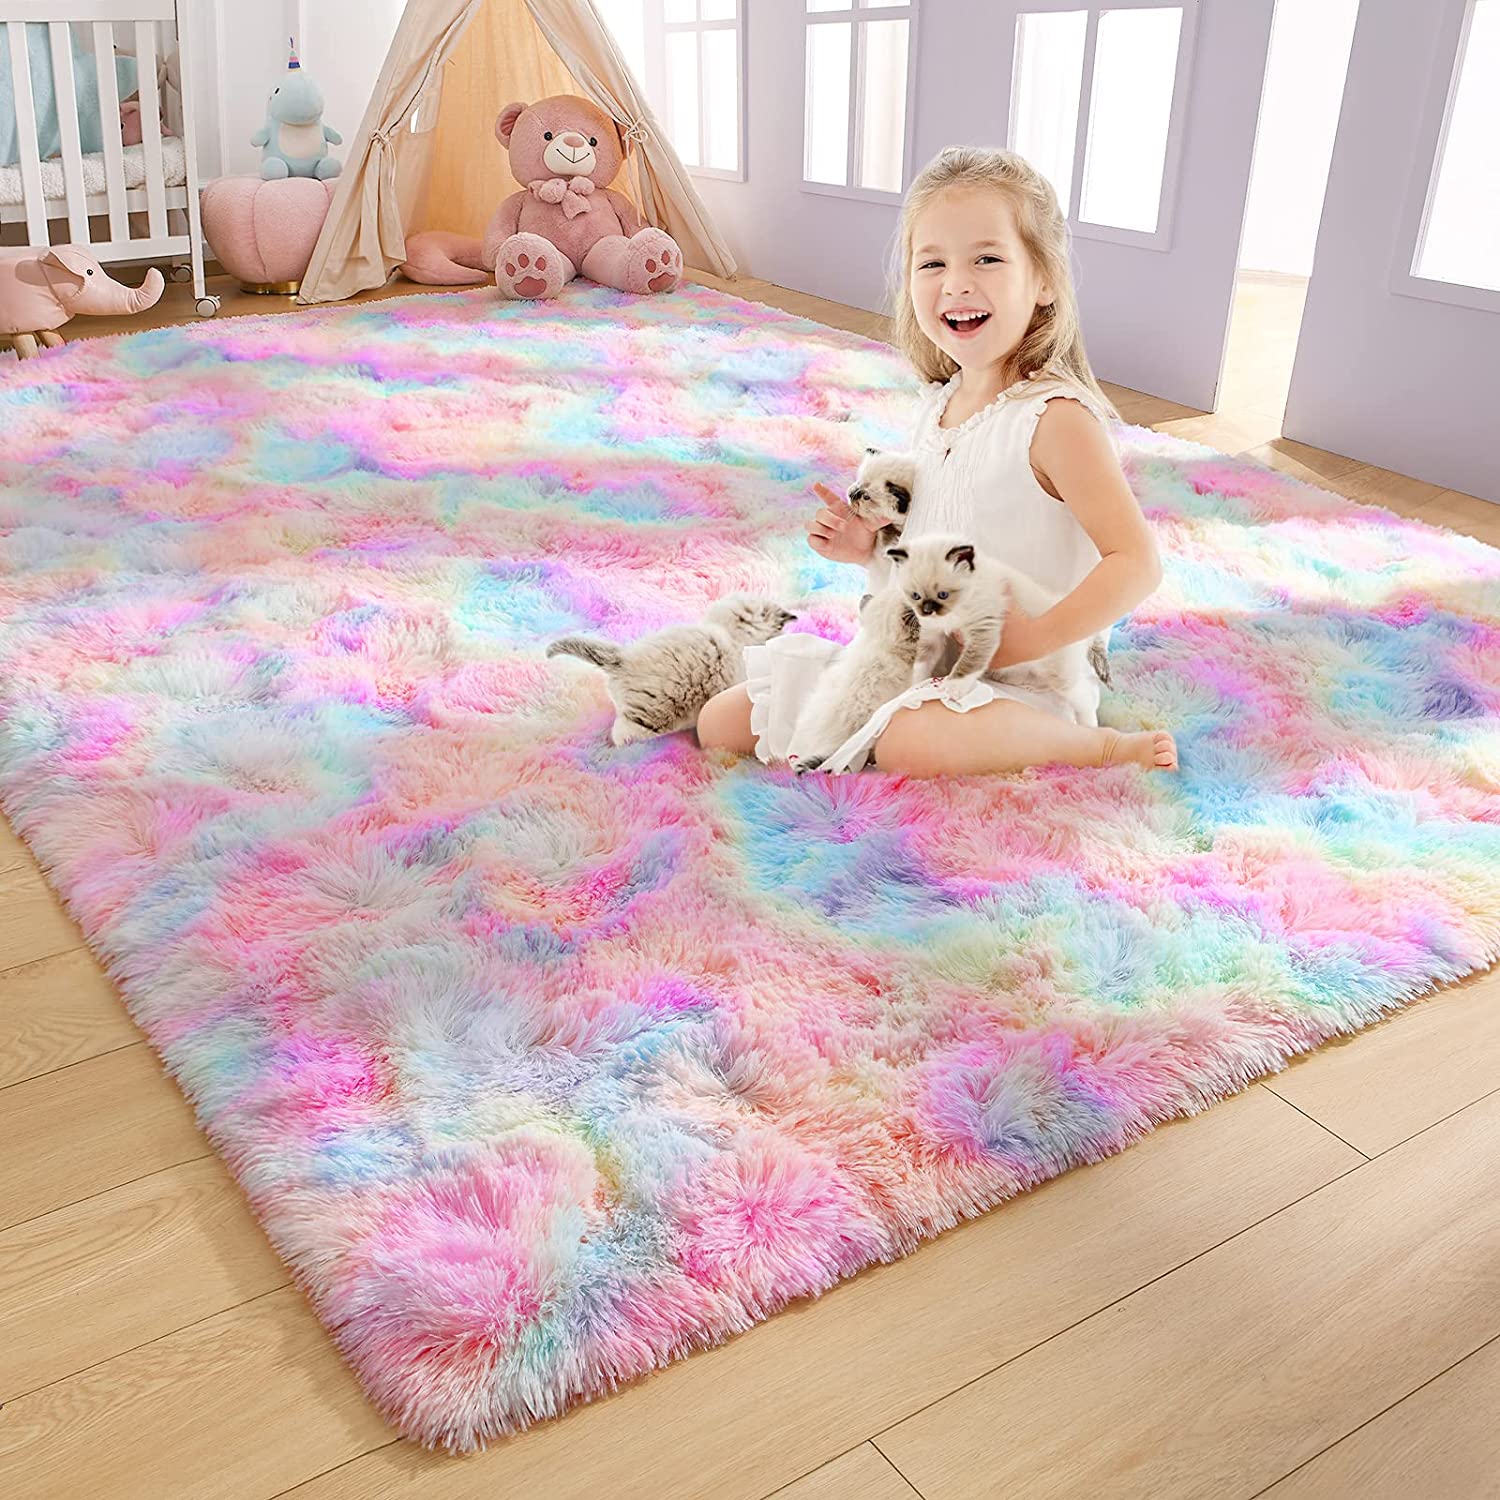 Noahas Super Soft Rainbow Rugs Area Rugs For Kids, Colorful Shaggy Carpet For Living Room Bedroom Nursery Room, 4'x6' - image 1 of 8